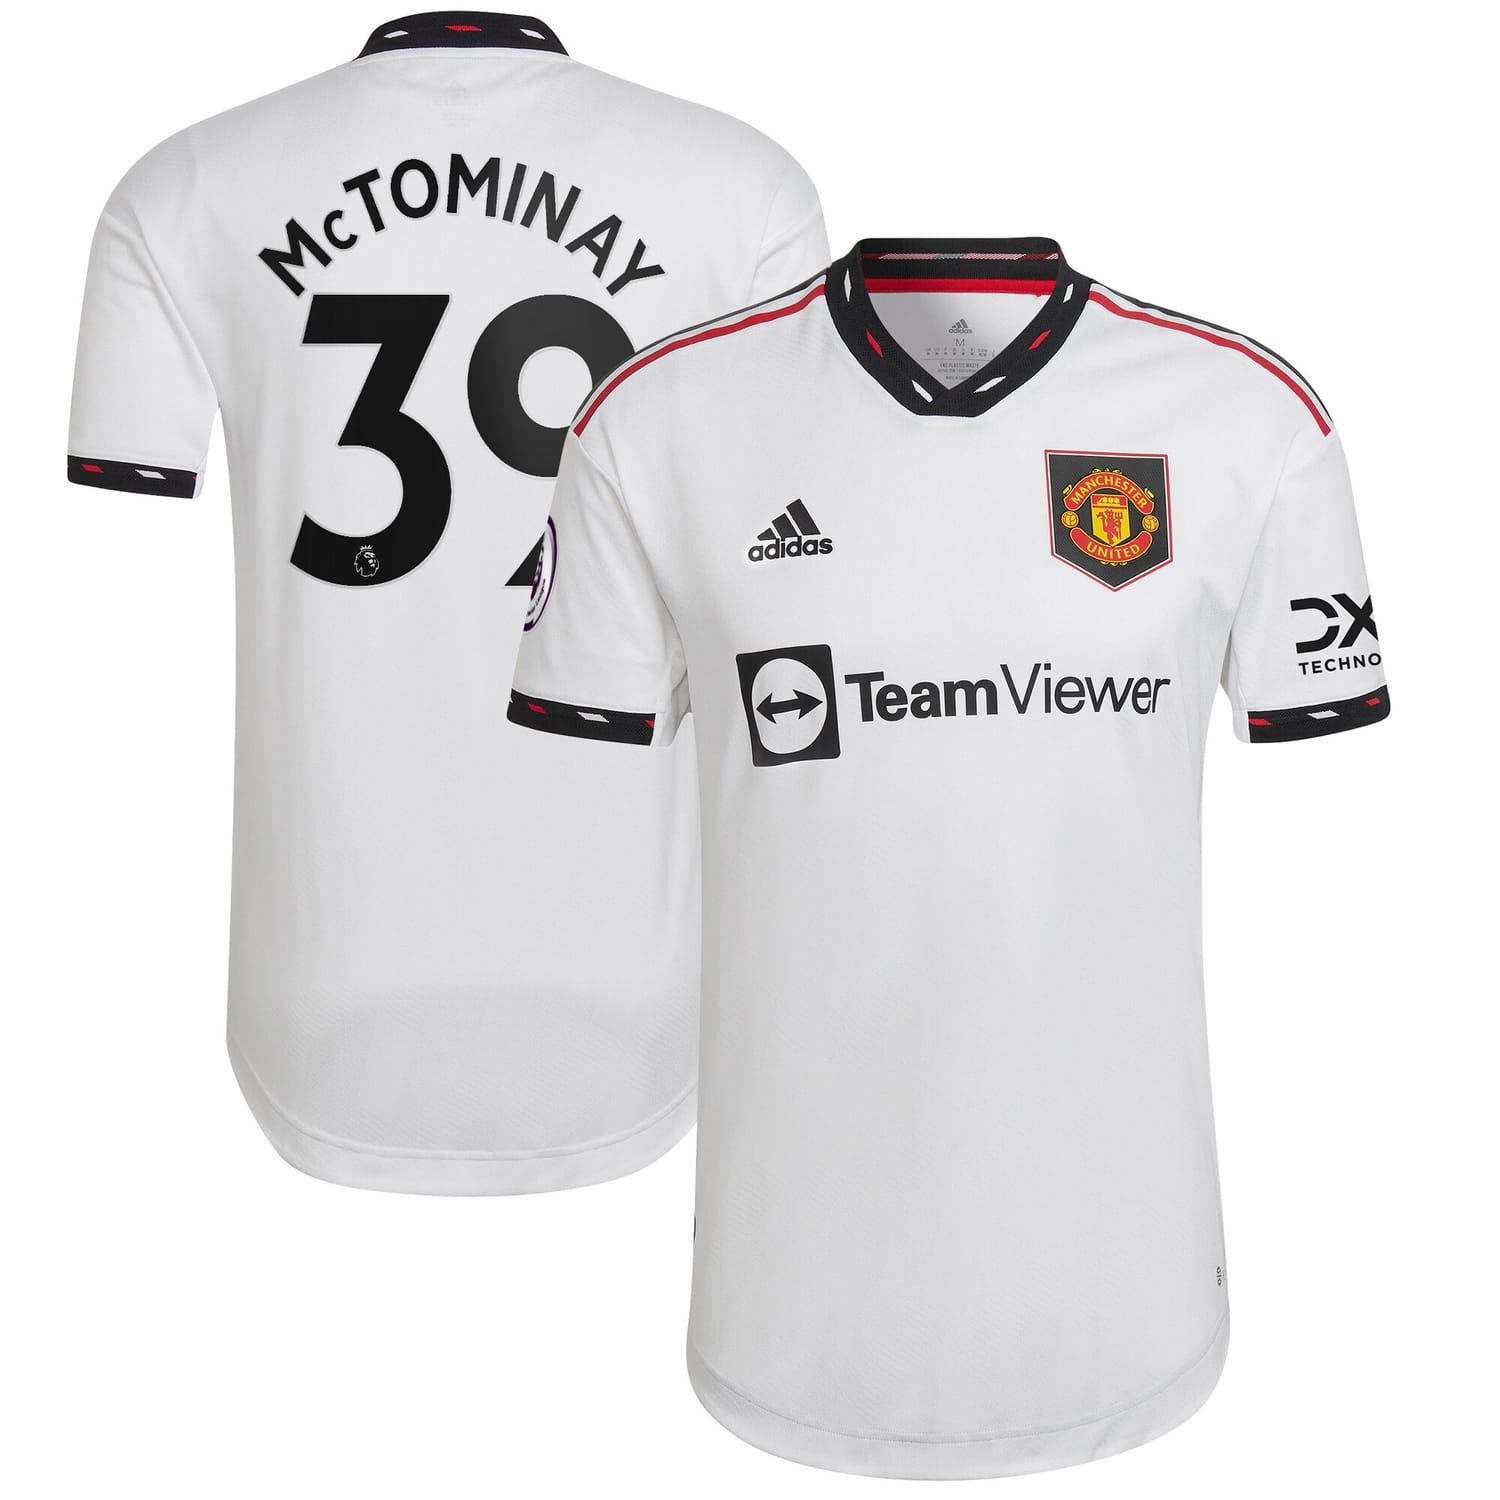 Premier League Manchester United Away Authentic Jersey Shirt White 2022-23 player Scott McTominay printing for Men